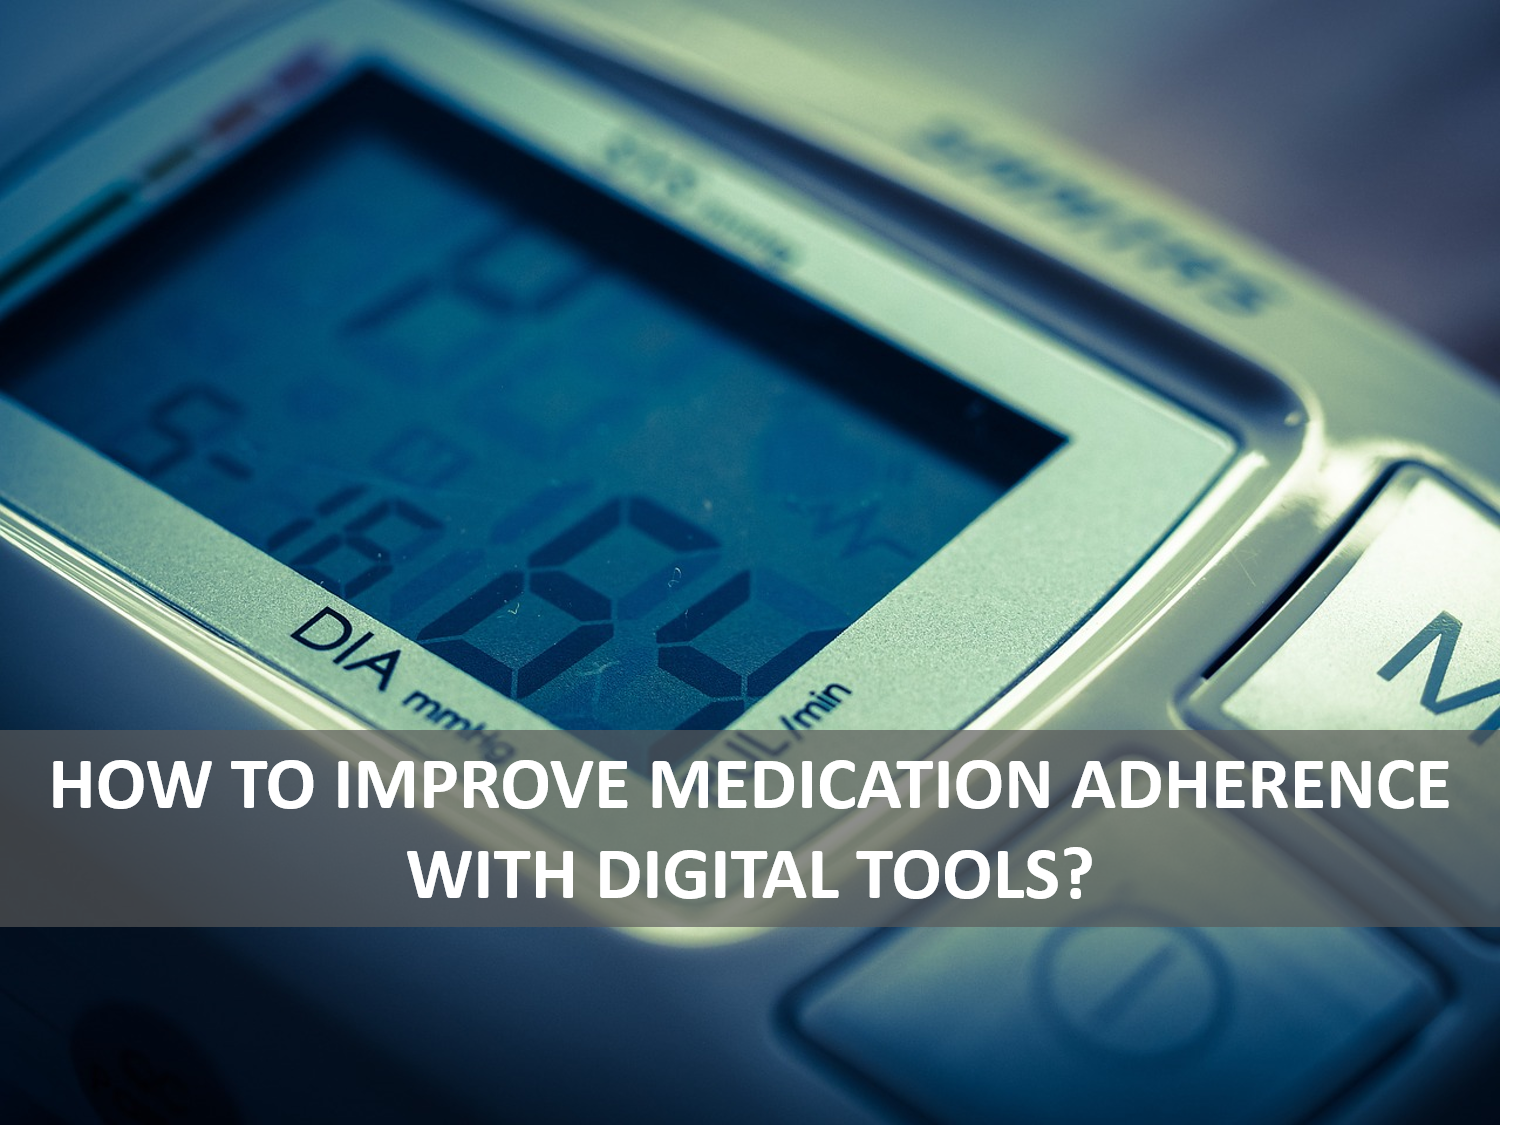 How to improve medication adherence with digital tools